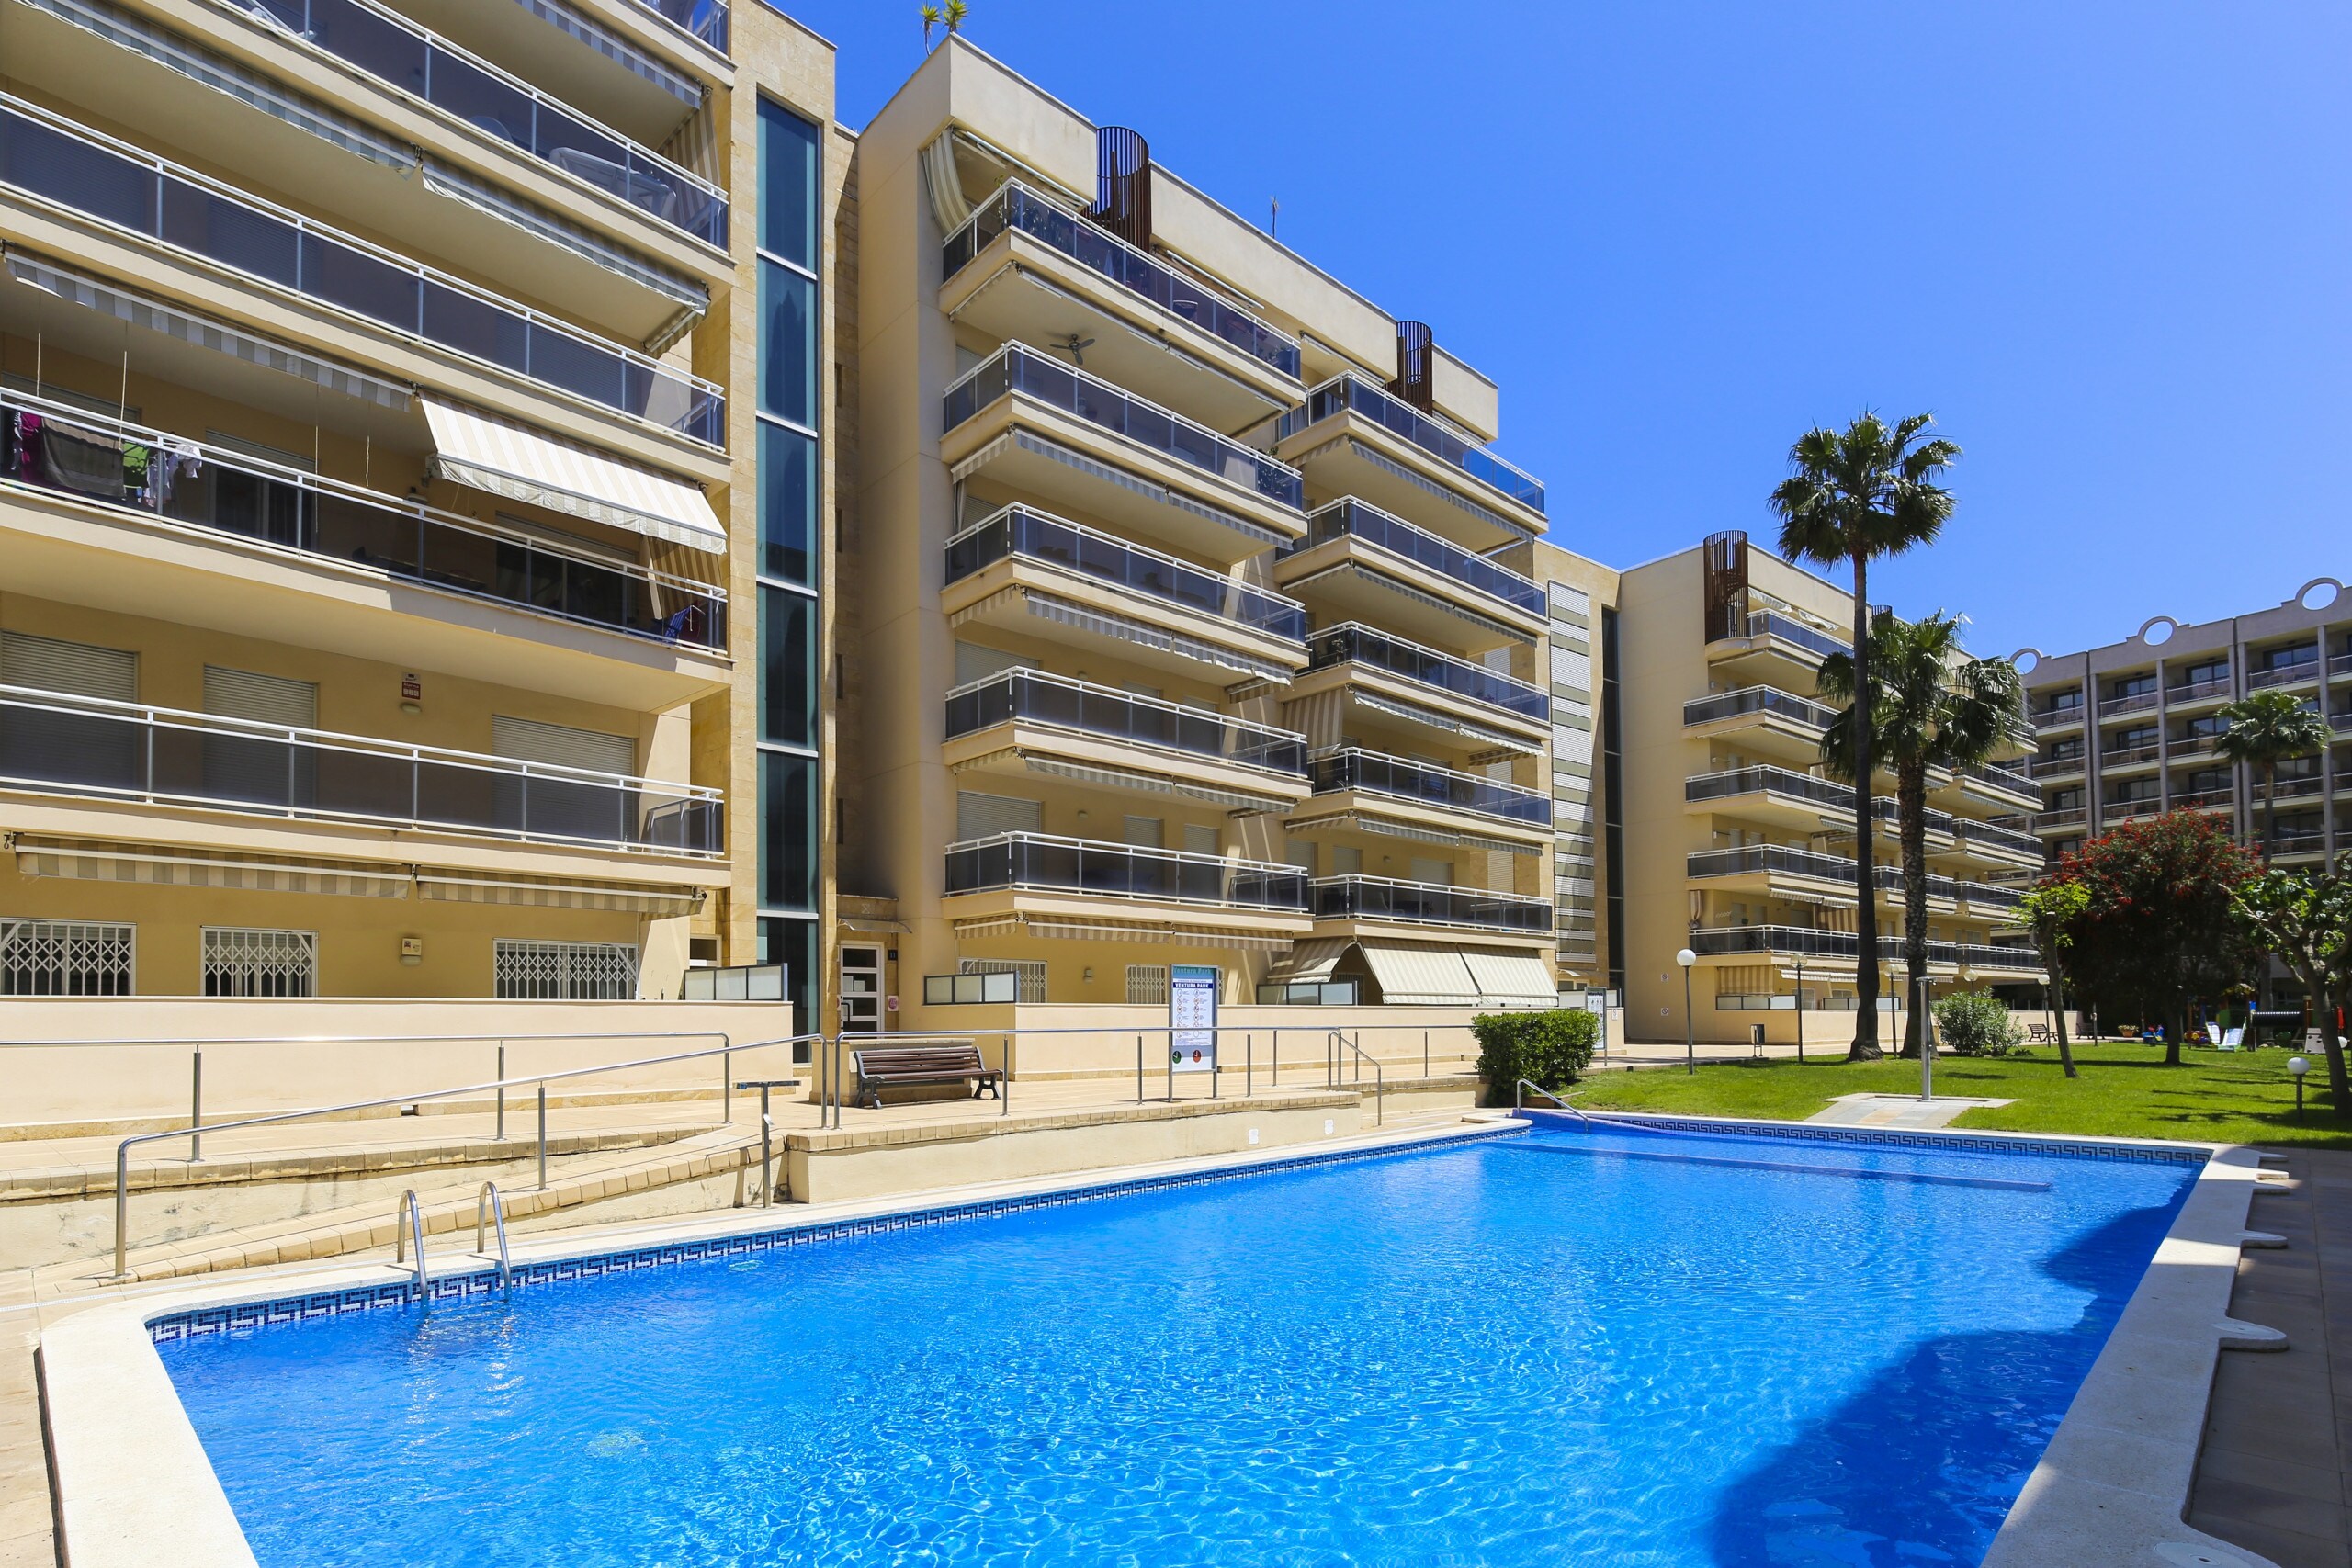 Property Image 2 - Fantastic apartment with shared pool near Port Aventura